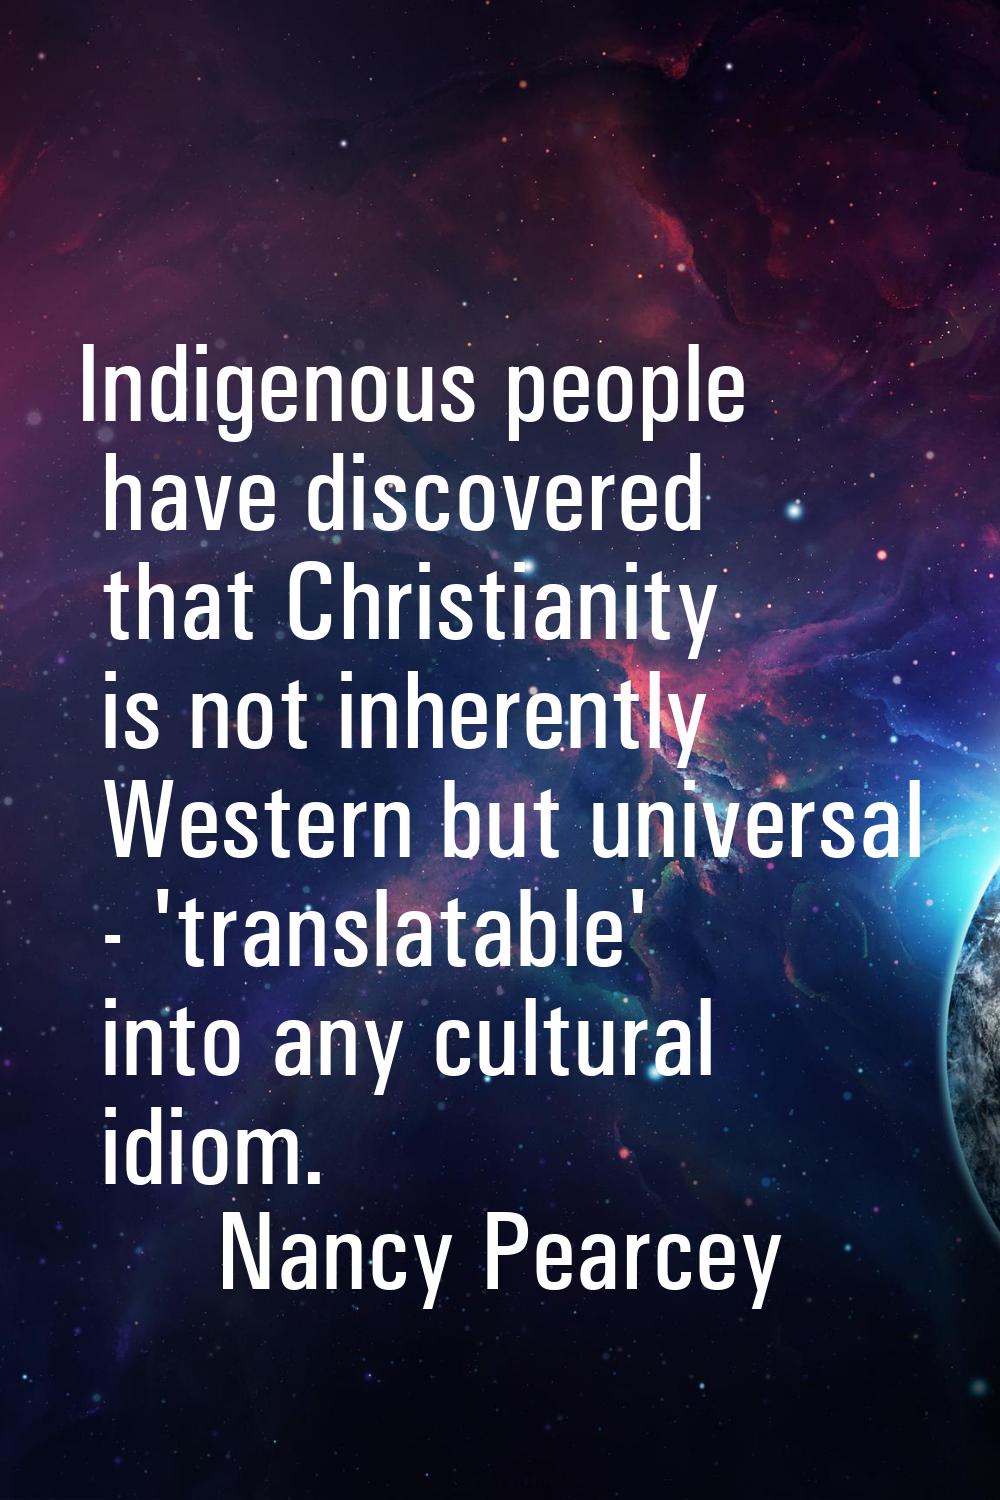 Indigenous people have discovered that Christianity is not inherently Western but universal - 'tran